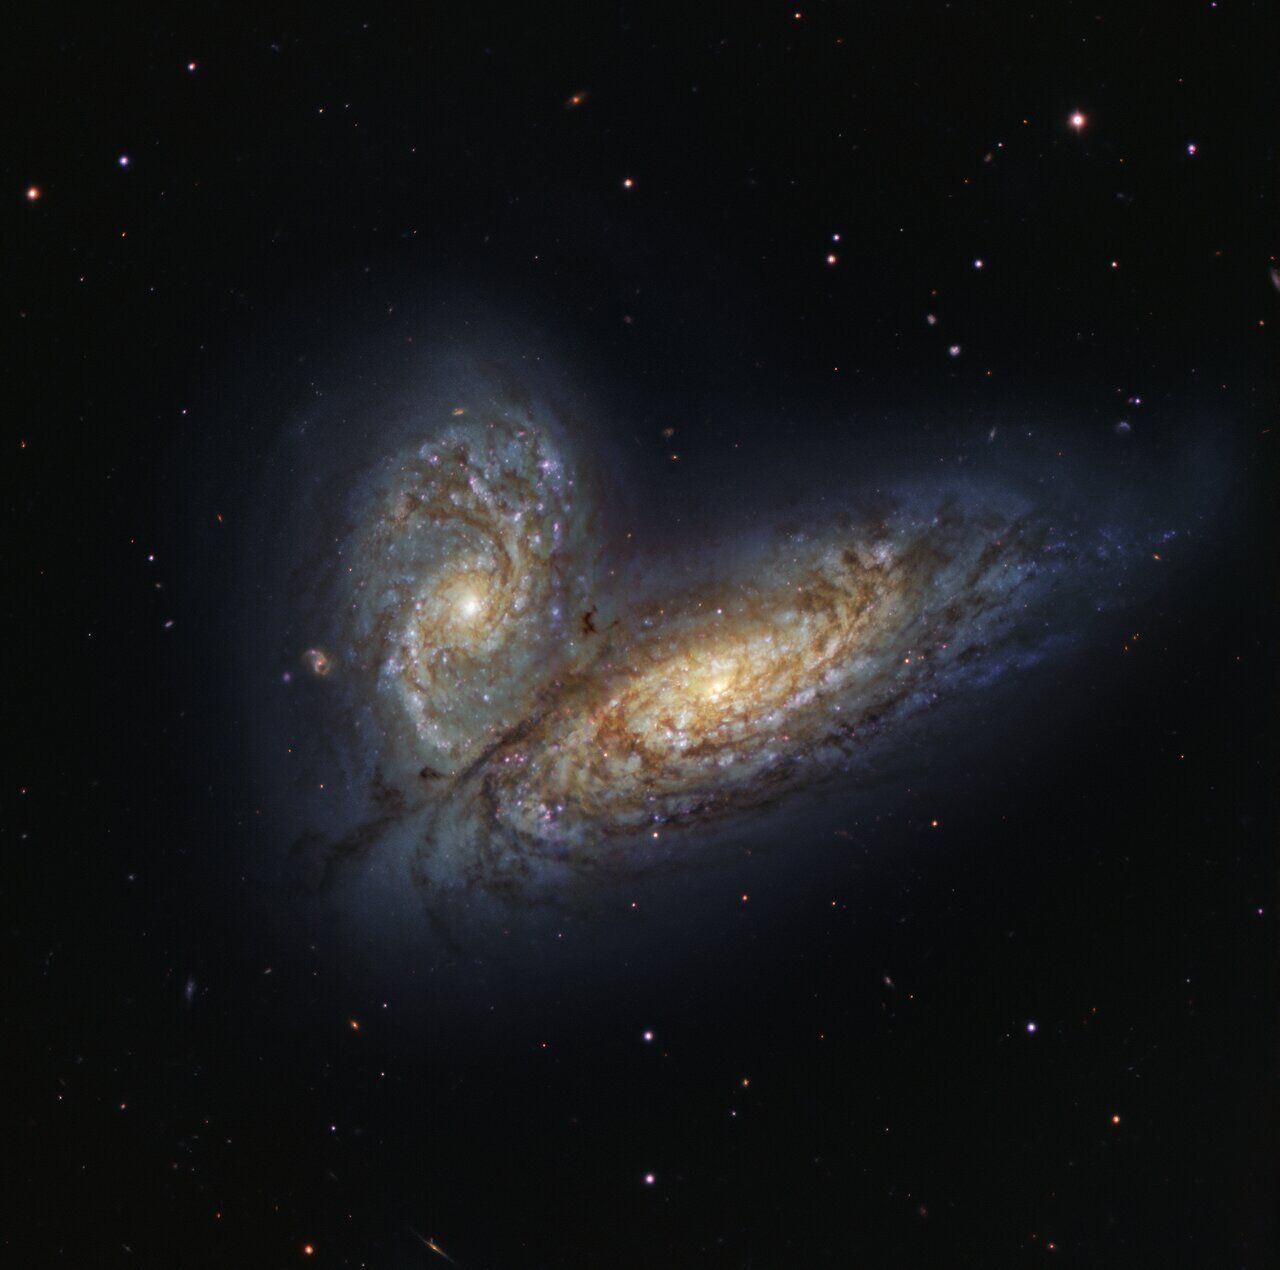 NGC4567 and NGC4568 are called ''butterfly'' galaxies due to their unusual shape